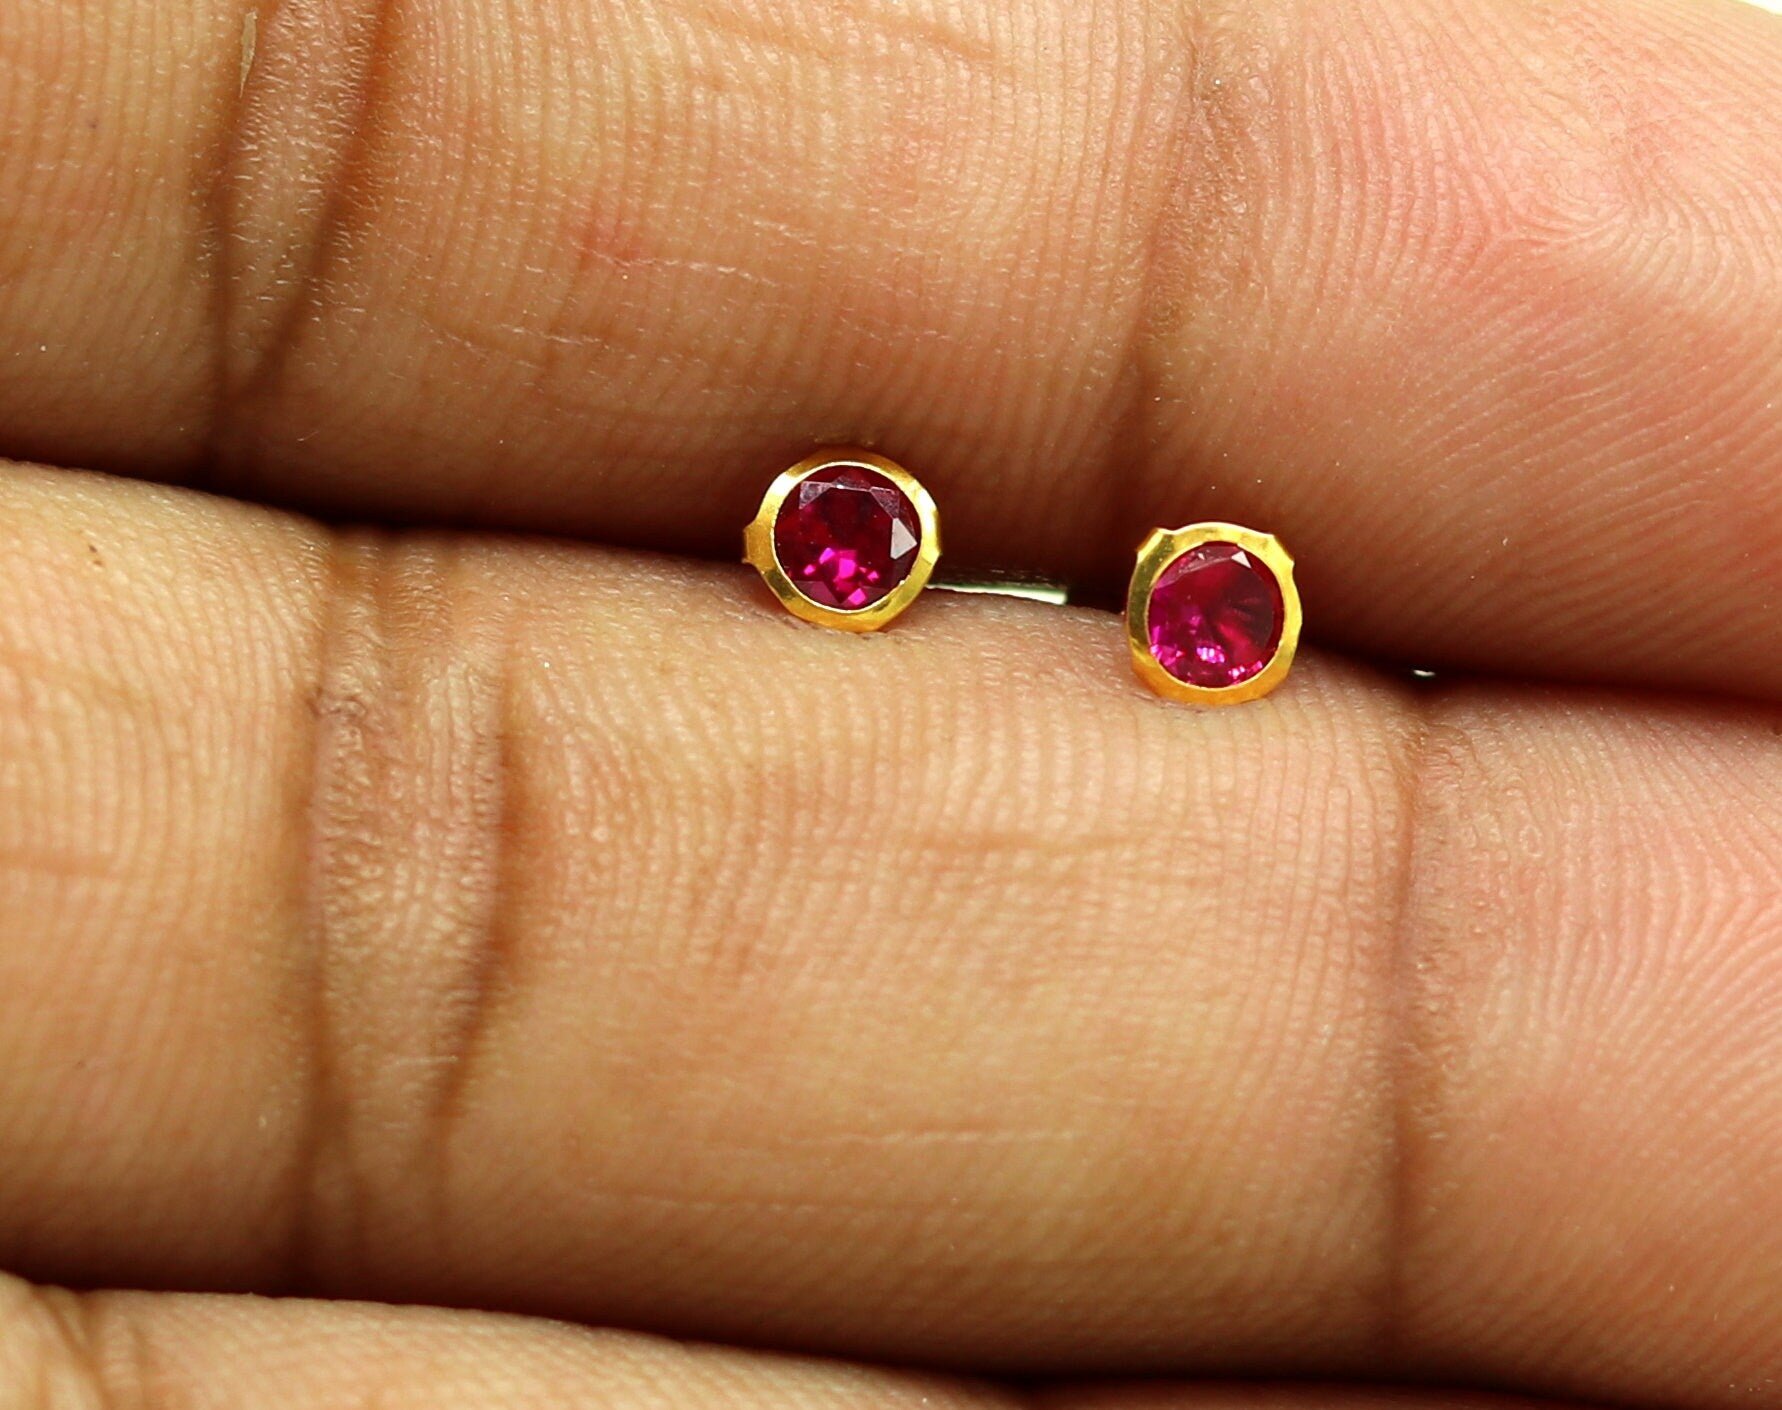 4mm 18k yellow gold handmade fabulous red cubic zircon stone excellent antique vintage design stud earrings pair unisex jewelry er114 - TRIBAL ORNAMENTS